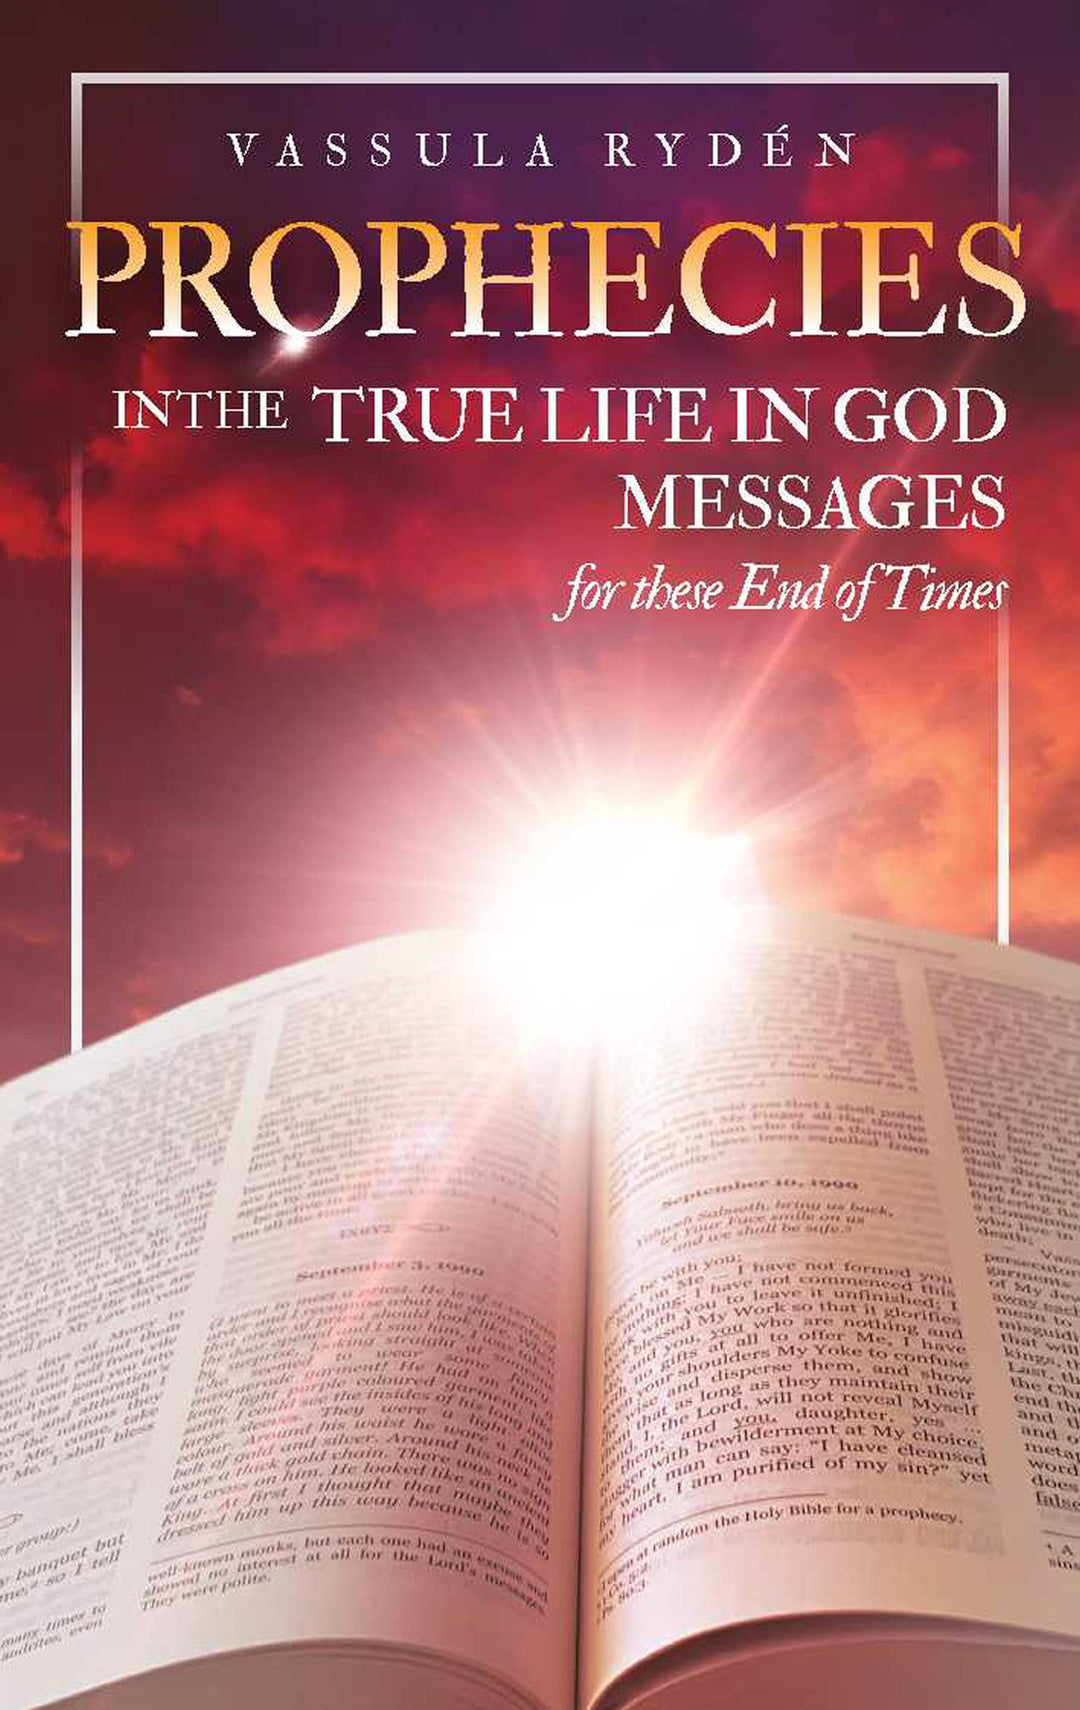 Booklet: Prophecies In The True Life in God Messages for these End of Times